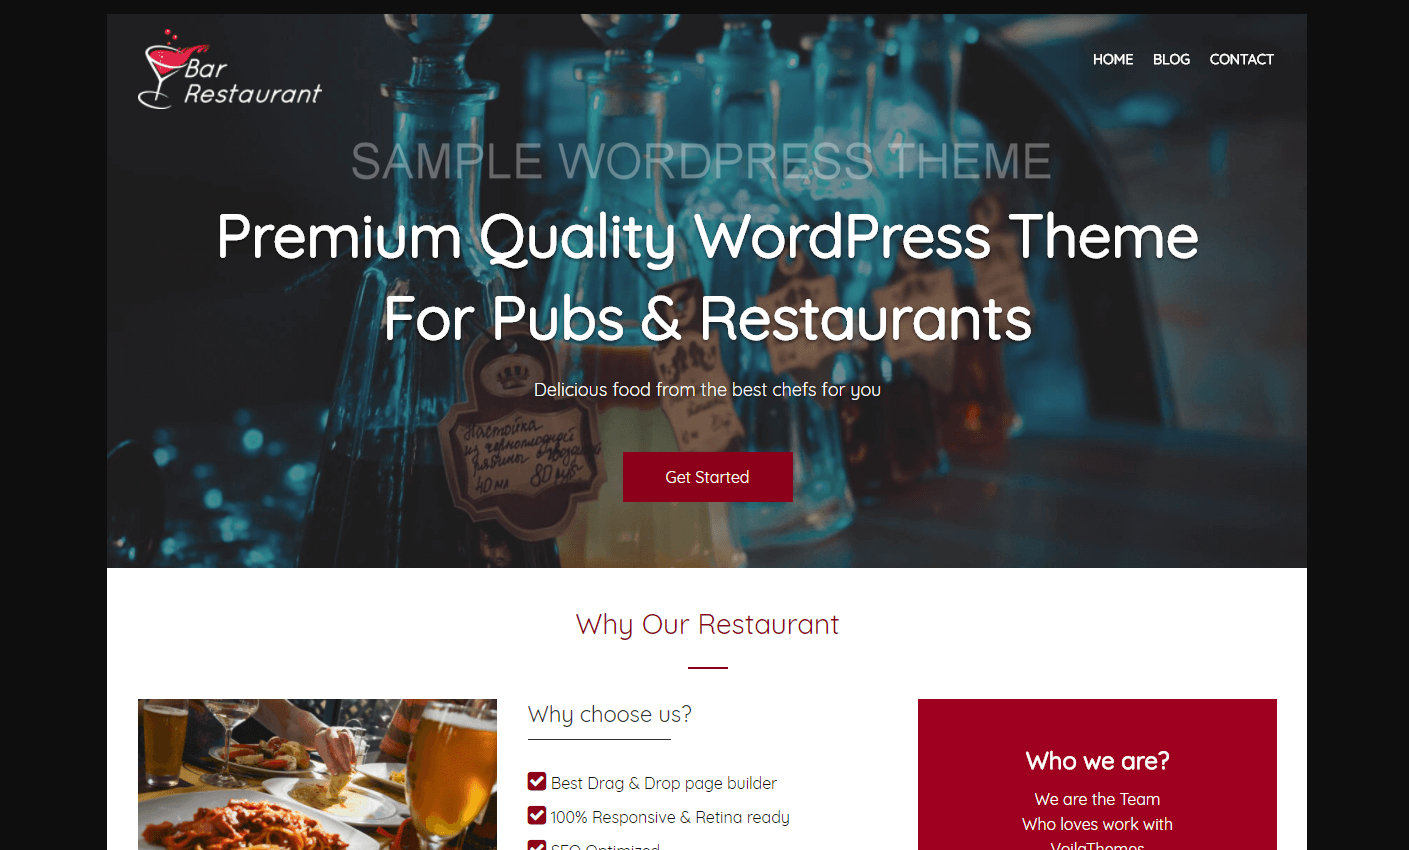 Theme sample with a restaurant.